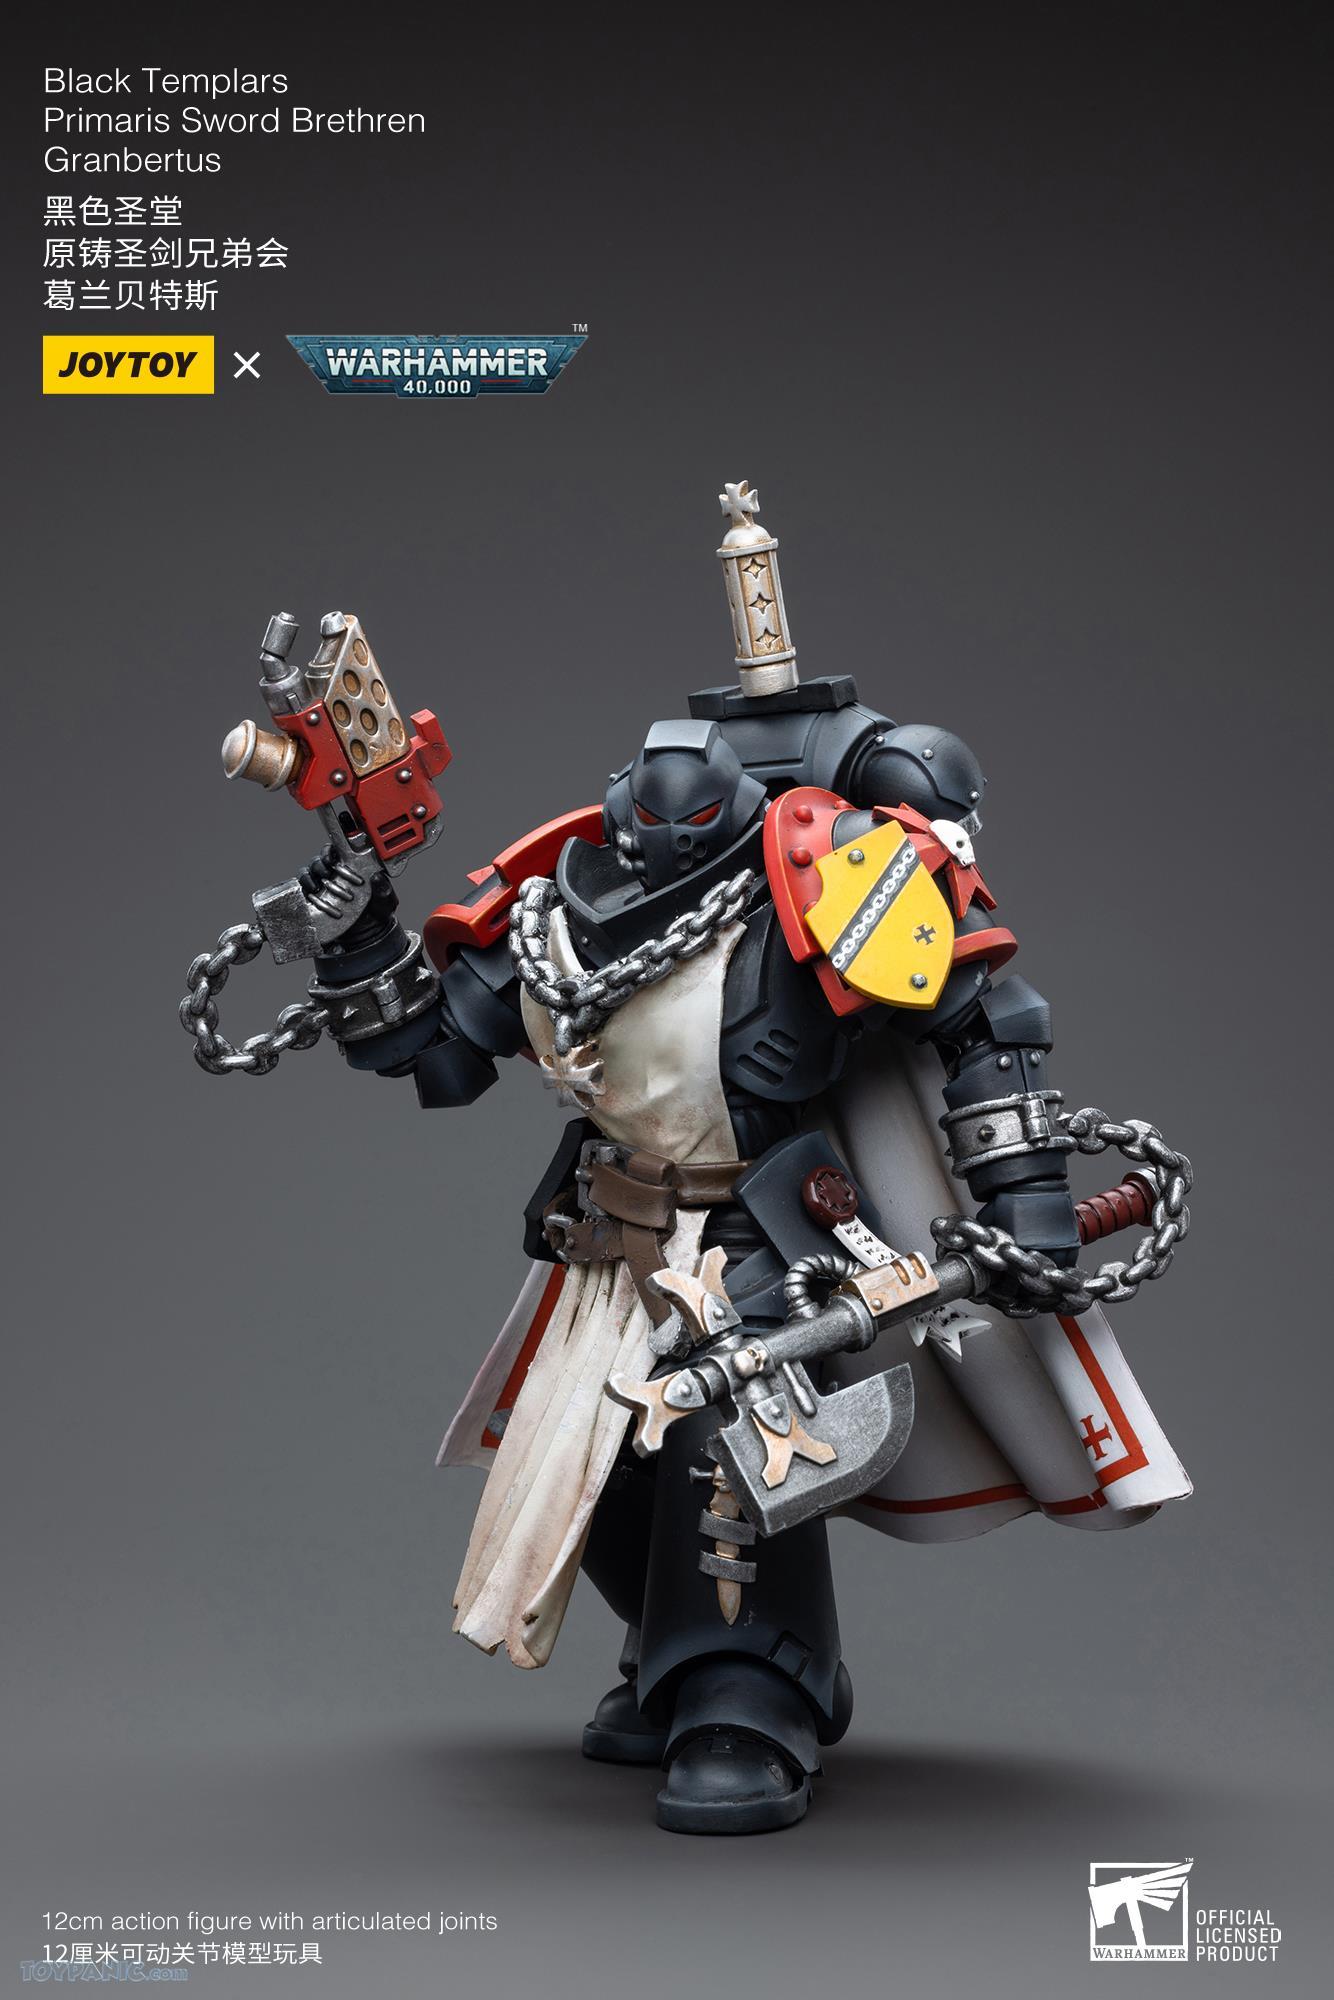 Toypanic - Malaysia's Premier Source for Hobbies, Toys, Figures